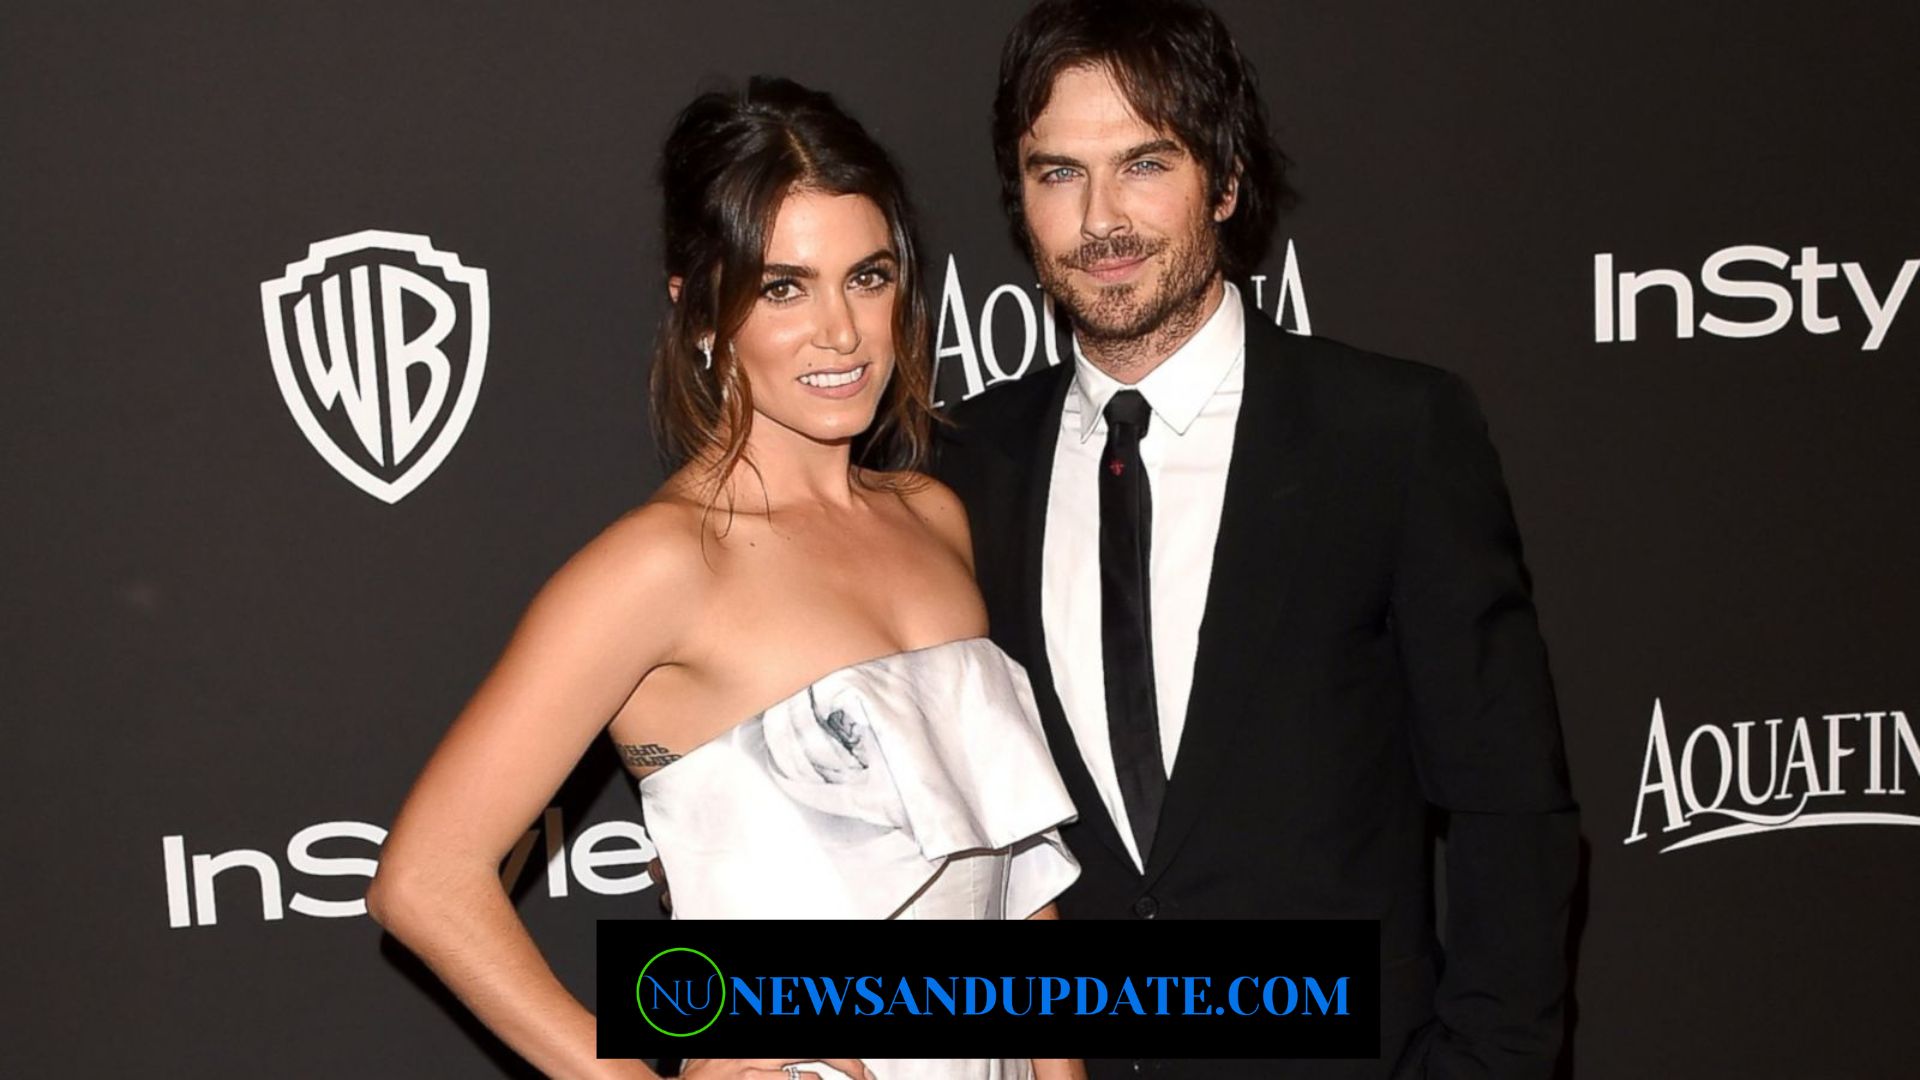 An Inside Look Into Nikki Reed And Ian Somerhalder’s Whirlwind Love Life!